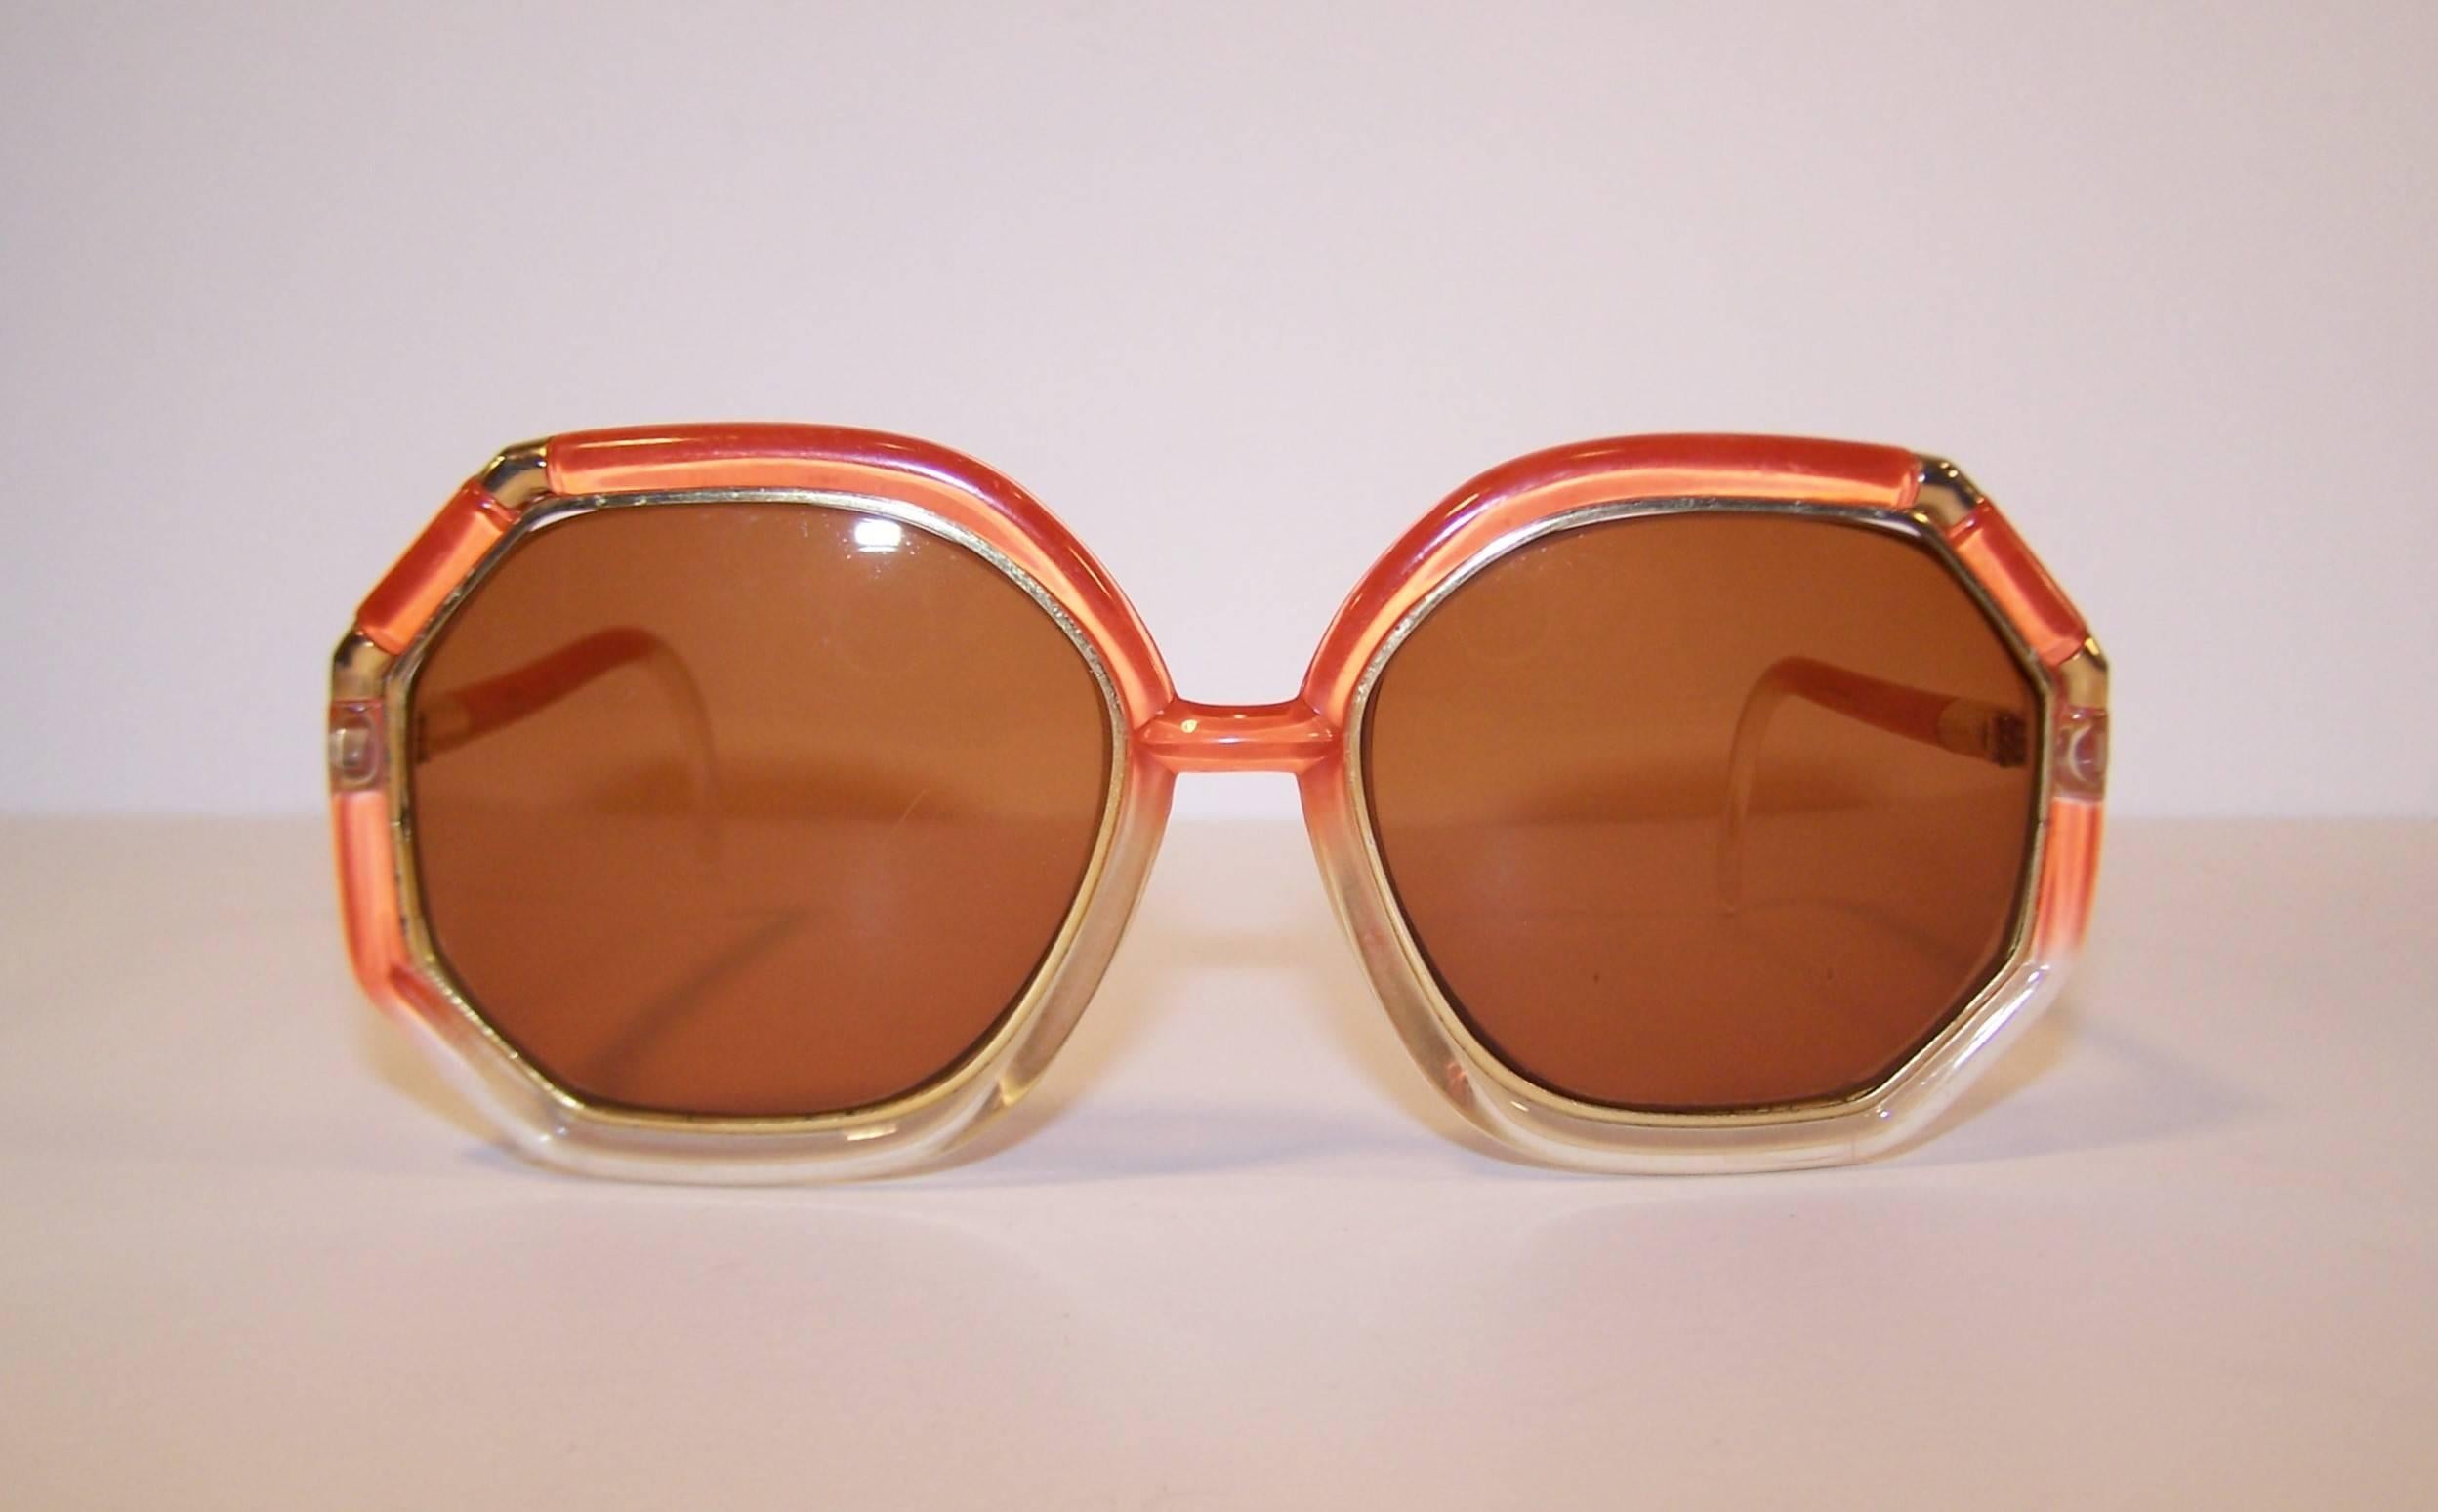 1970's Ted Lapidus sunglasses are the epitome of period perfect pop mod style.  These translucent tangerine orange shades fade from color to clear providing a gradient design with amber colored lenses and gold metal embellishments.  The tubular